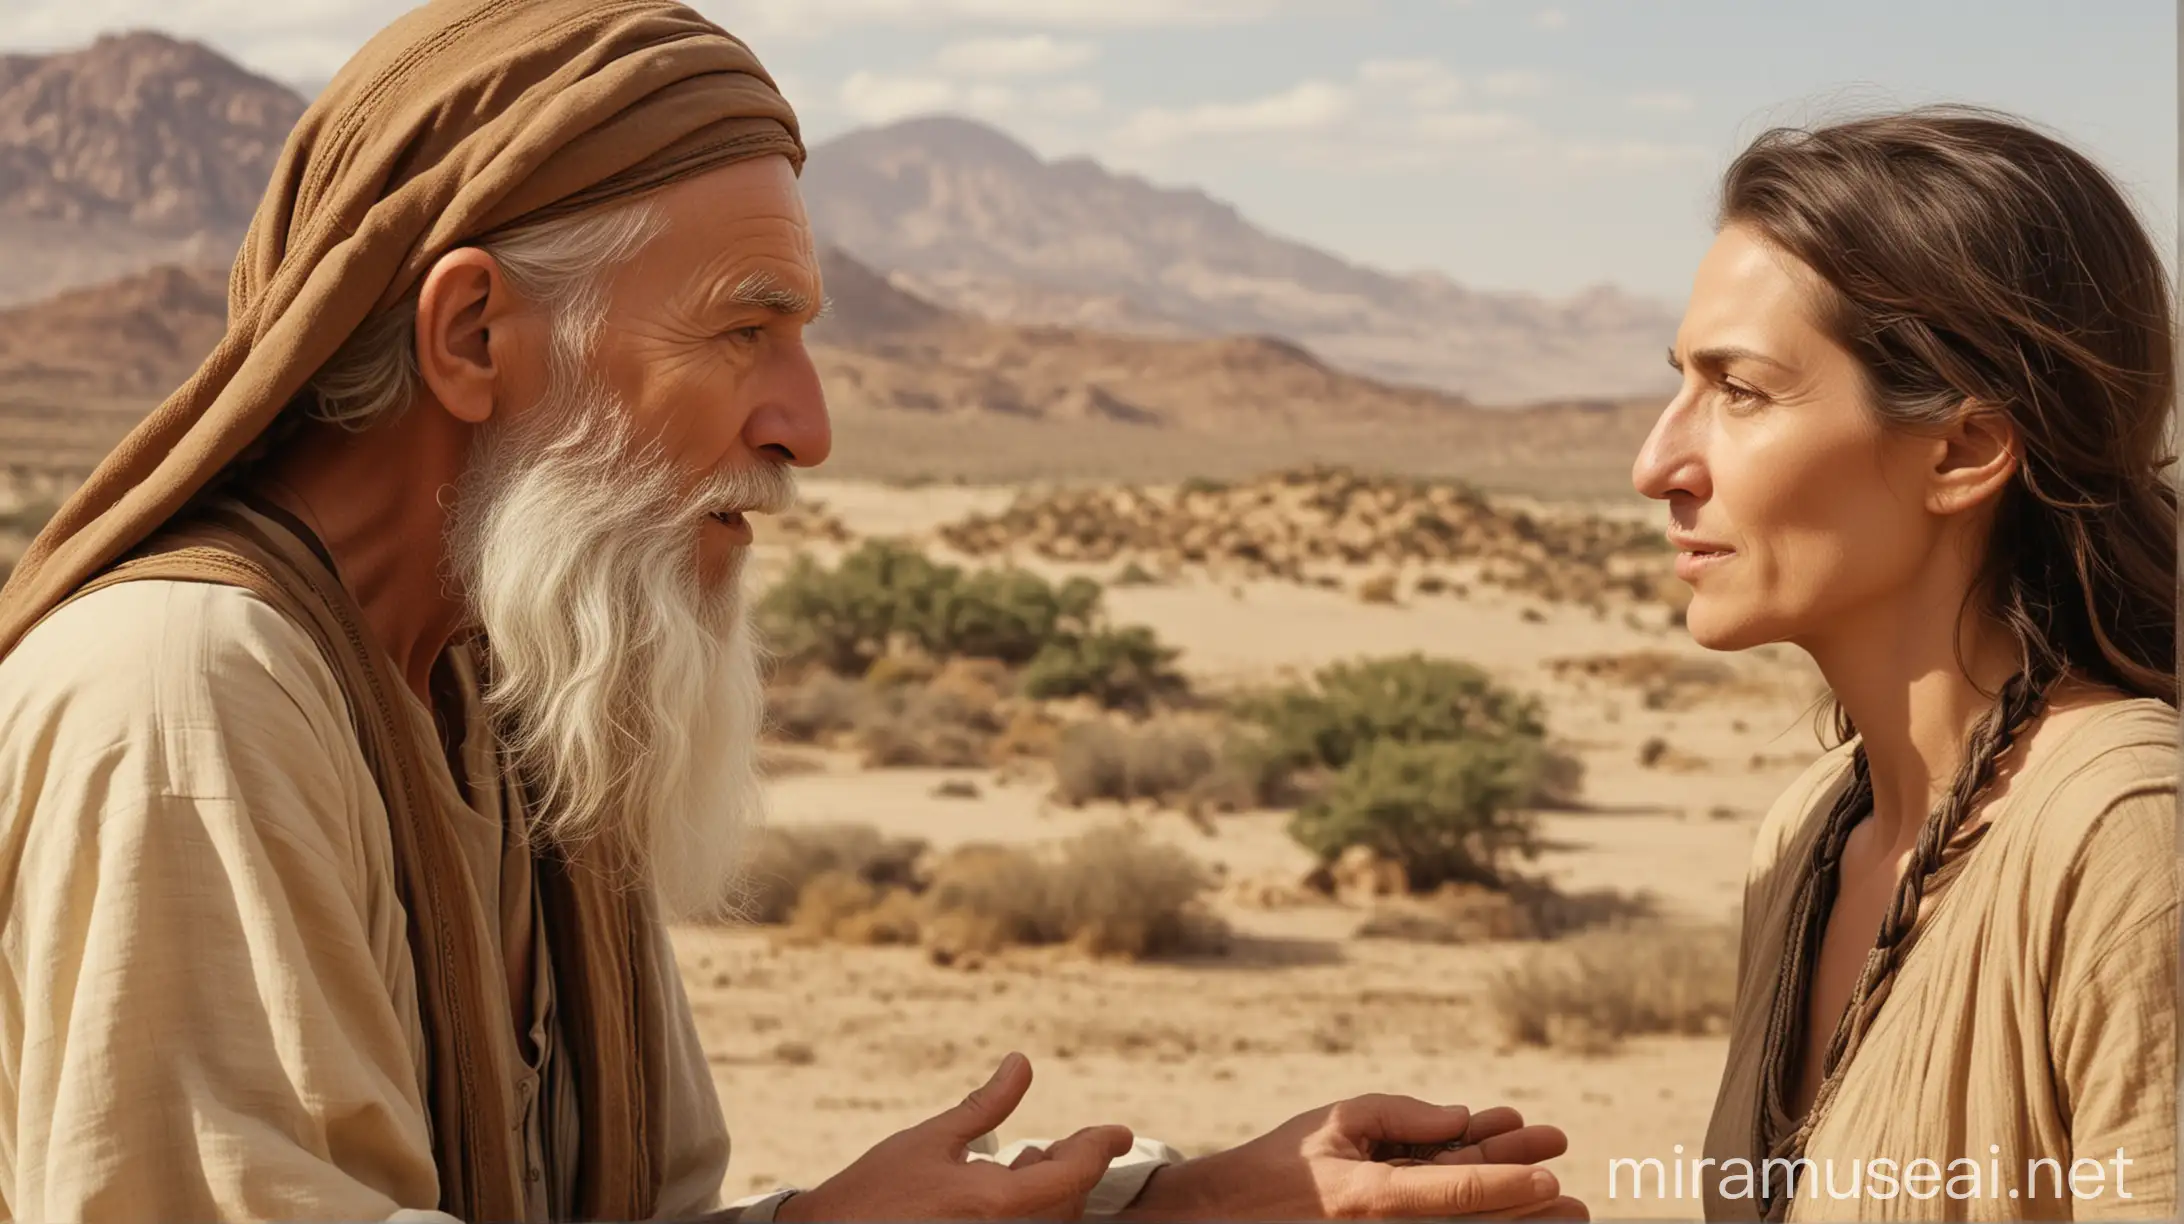 an old man and an attractive looking woman talking to each other in a desert location during the Era of the Biblical Moses